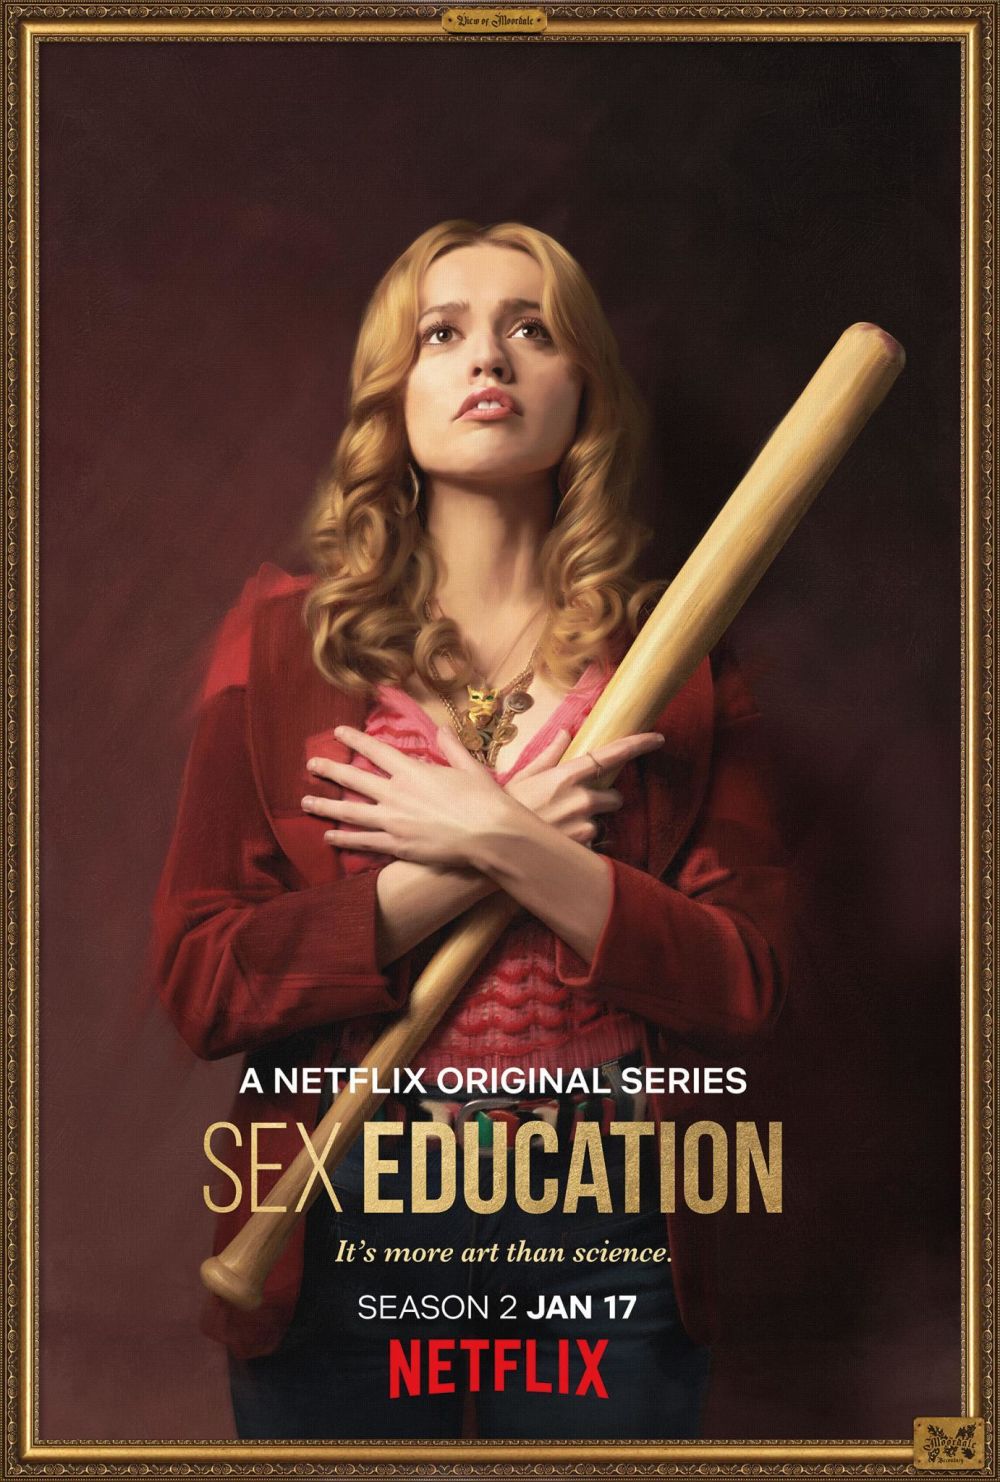 A promotional portrait of Aimee from the Netflix series, Sex Education, holding a baseball bat.